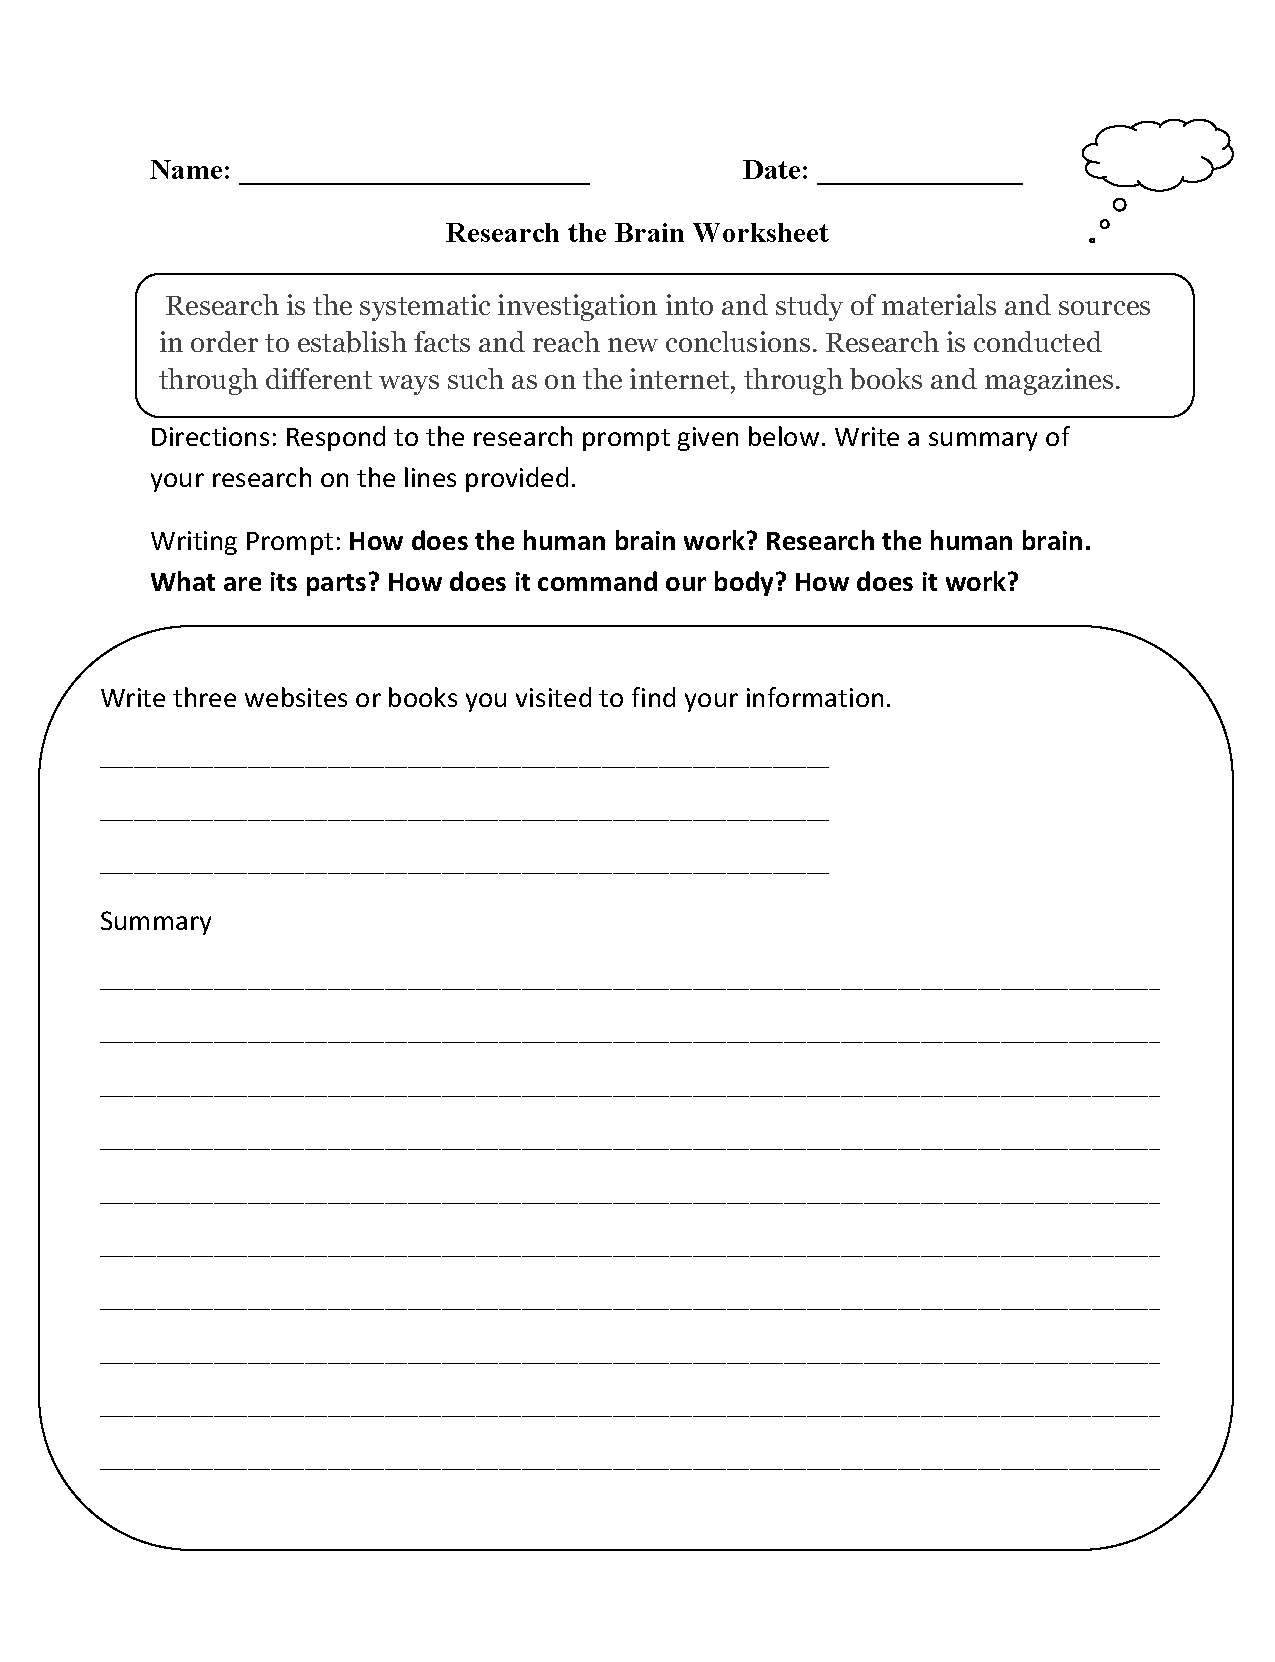 Research the Brain Worksheet